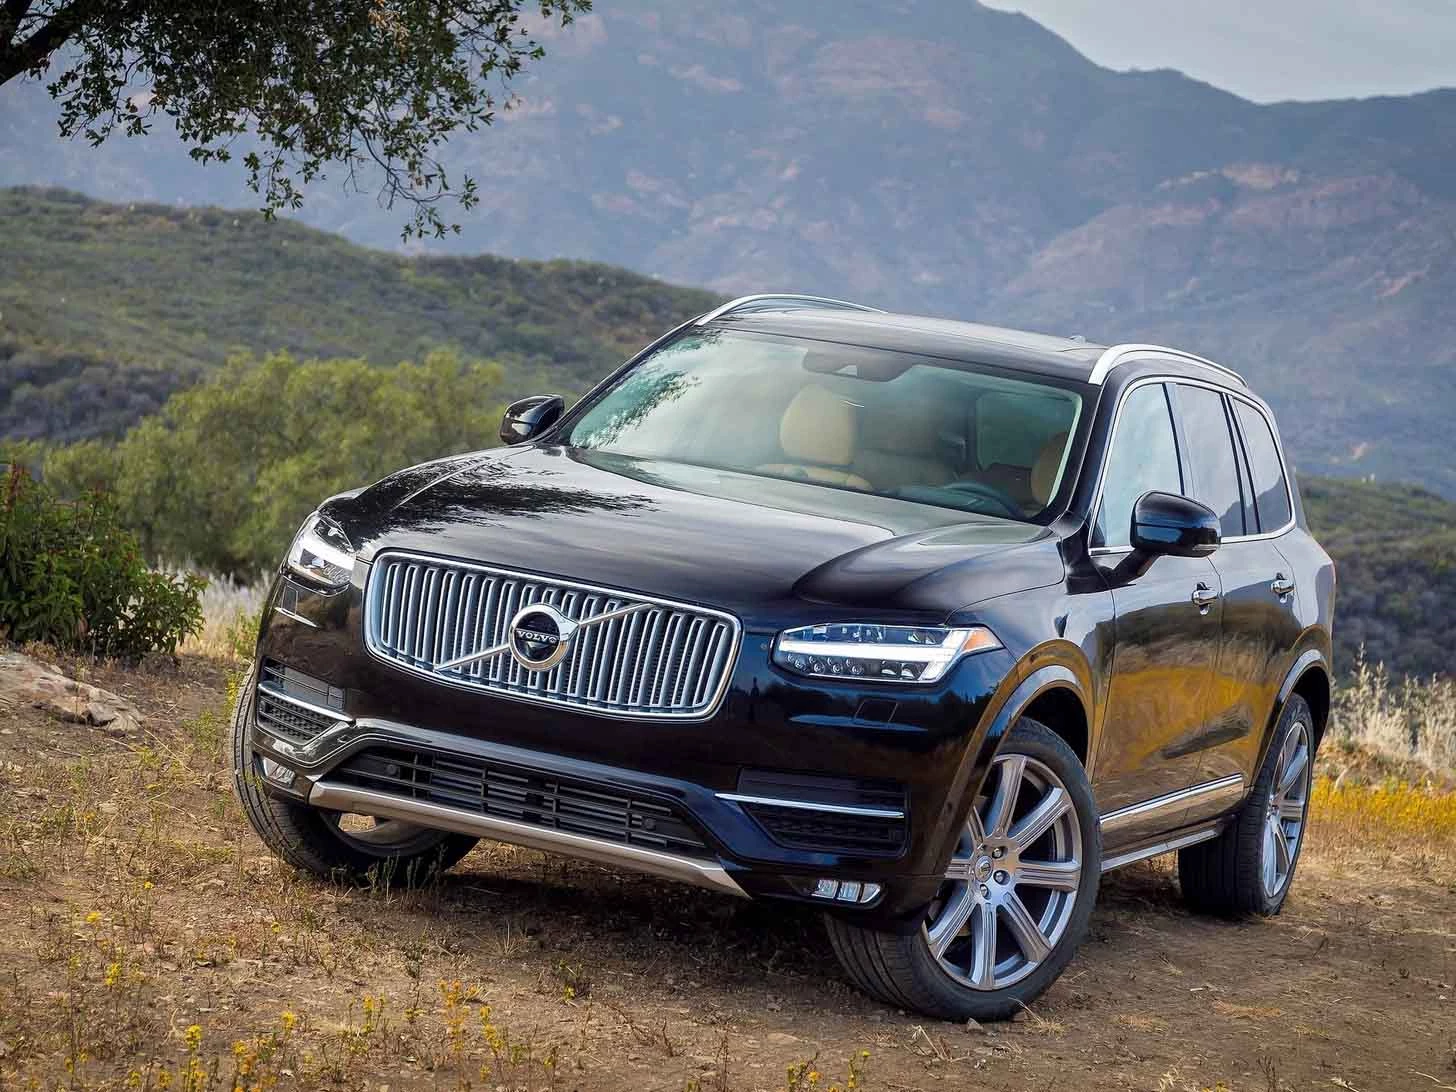 Volvo Xc90 2018 Eksterior Suv Luksus Sikkerhed Front Forlygter Thors Hammer